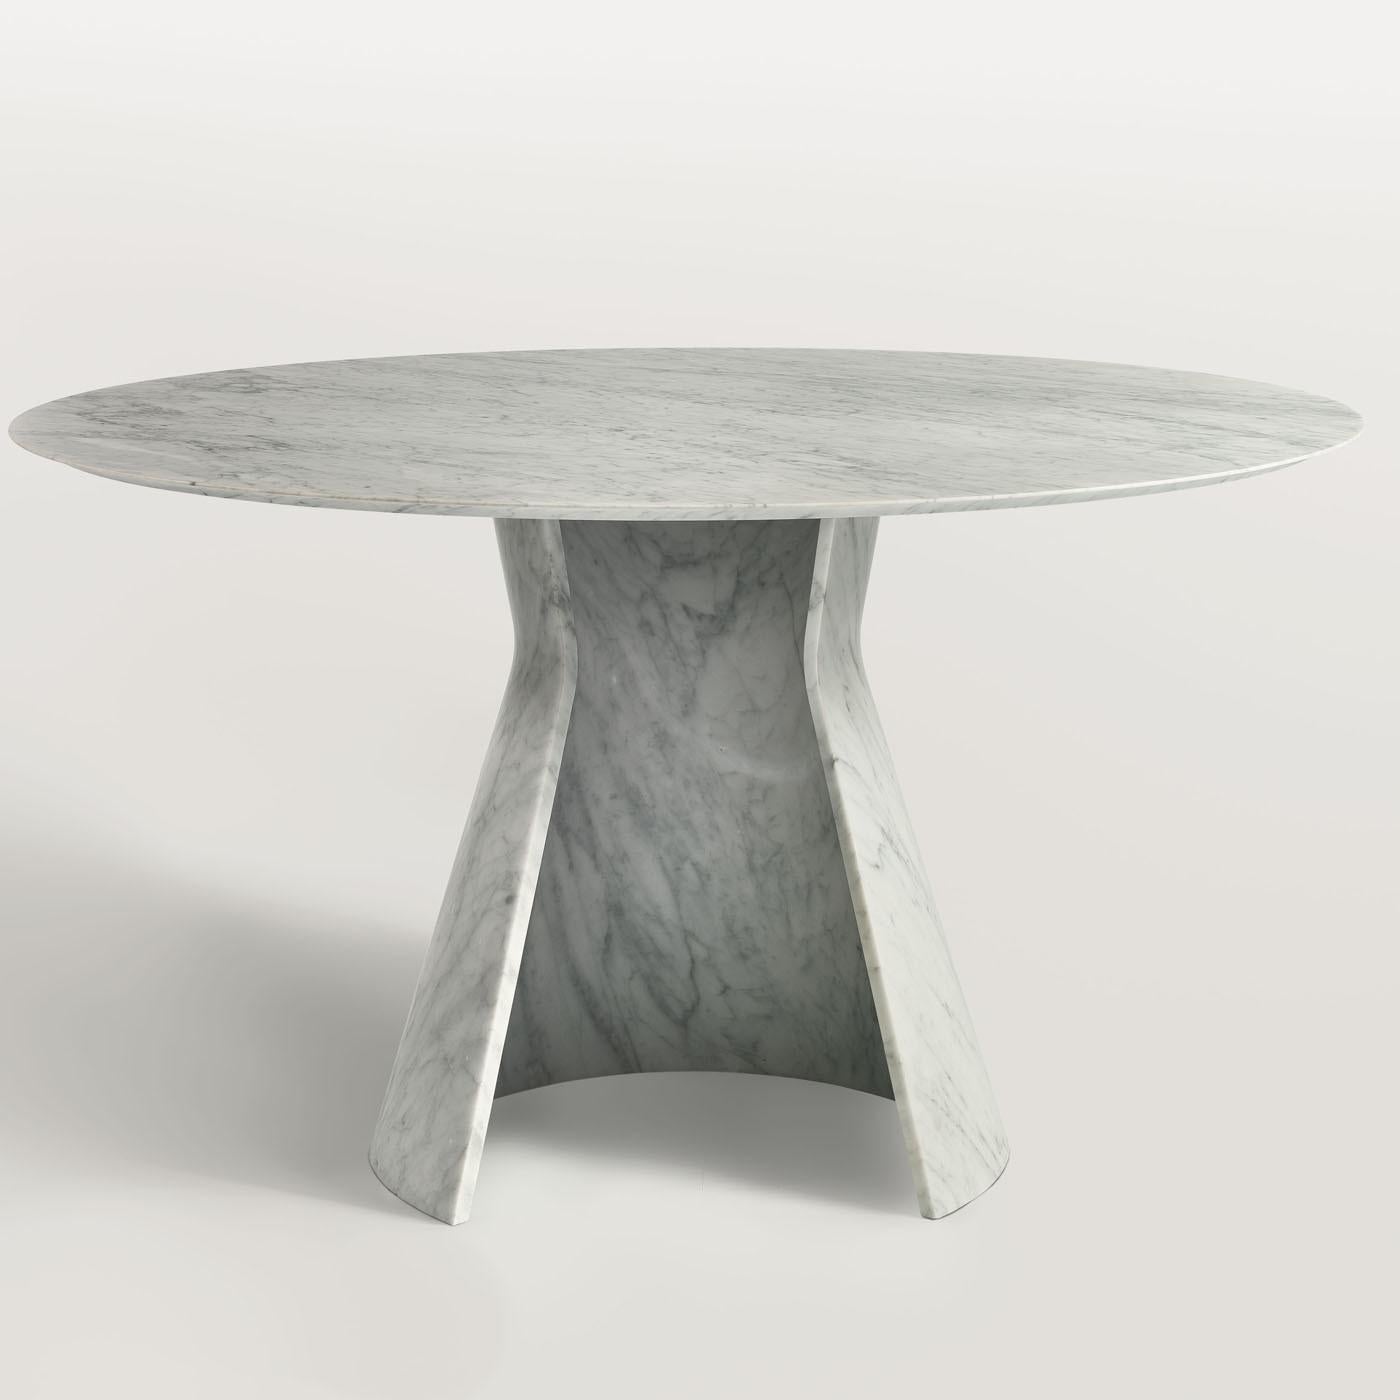 As the name suggests, this elegant table is distinctive for an enveloping base that creates a curl and raises up in a conical shape to support its round top (Ã˜ 130 cm). The base measures Ã˜ 65 cm and is made from a single piece of carved marble,